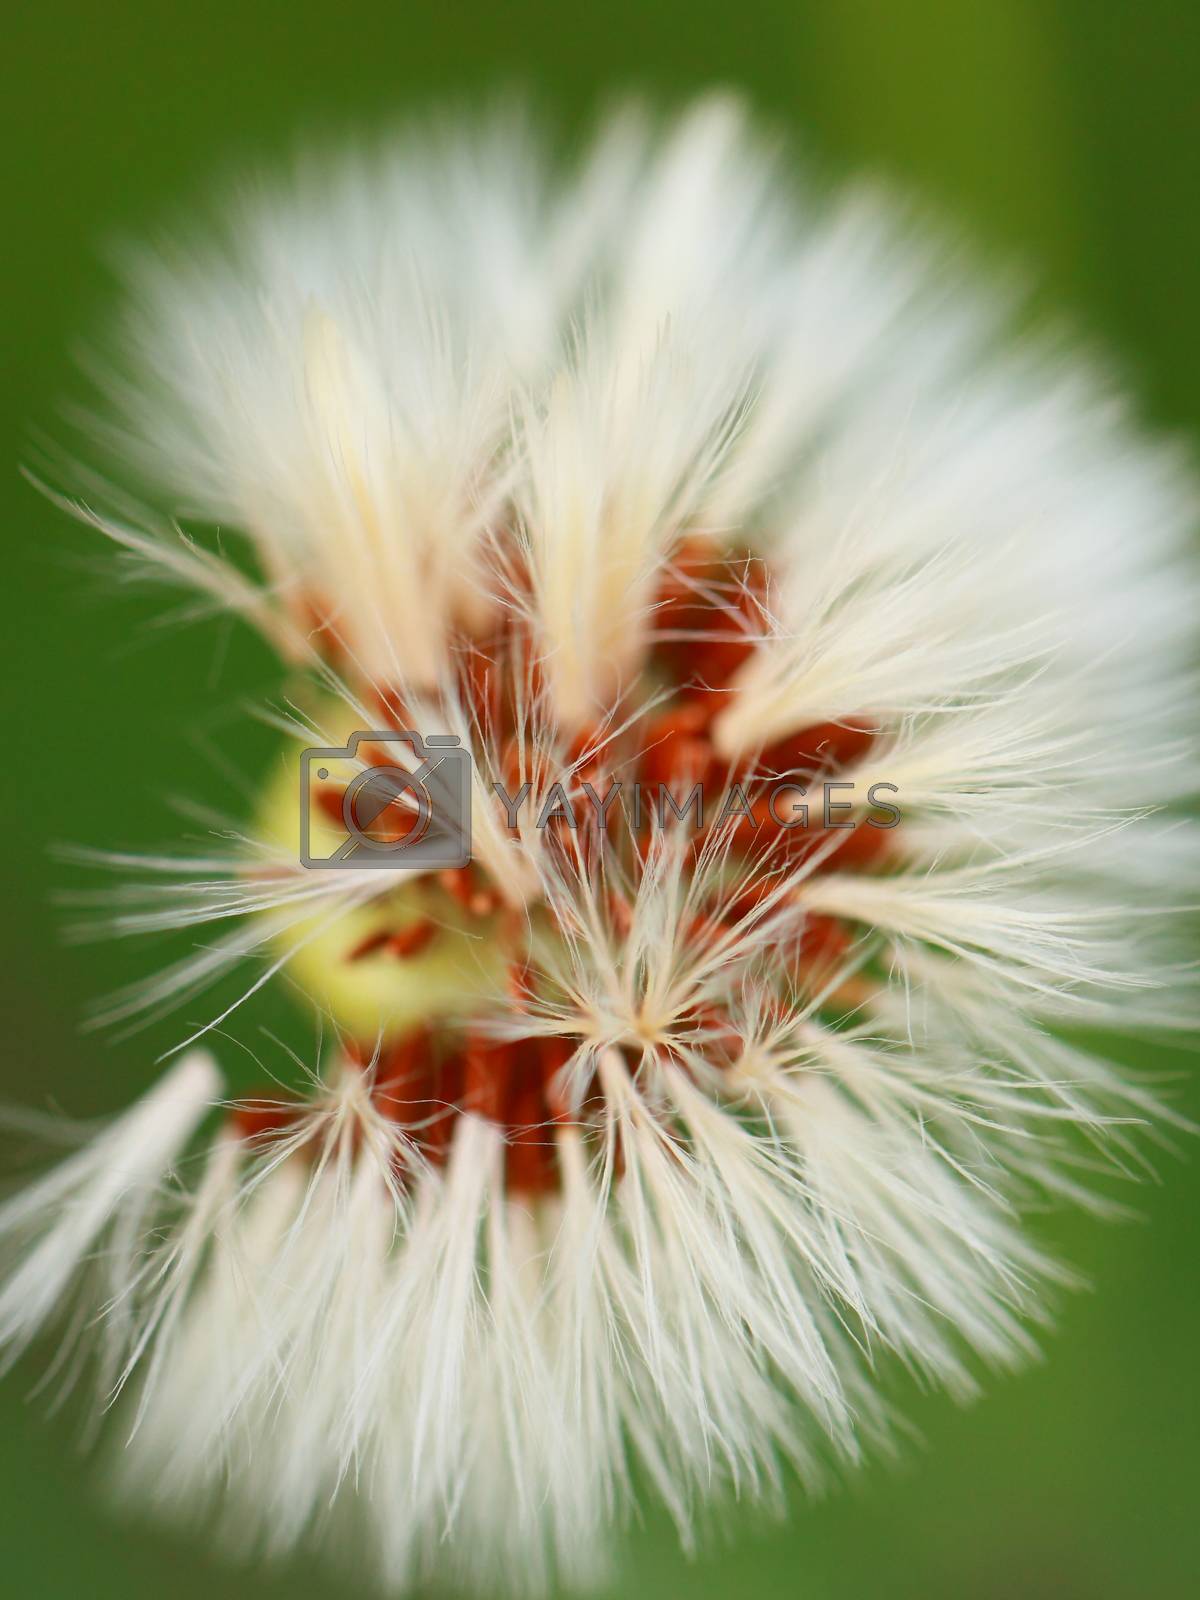 Royalty free image of Close-up of dandelion seed head  by mariusz_prusaczyk